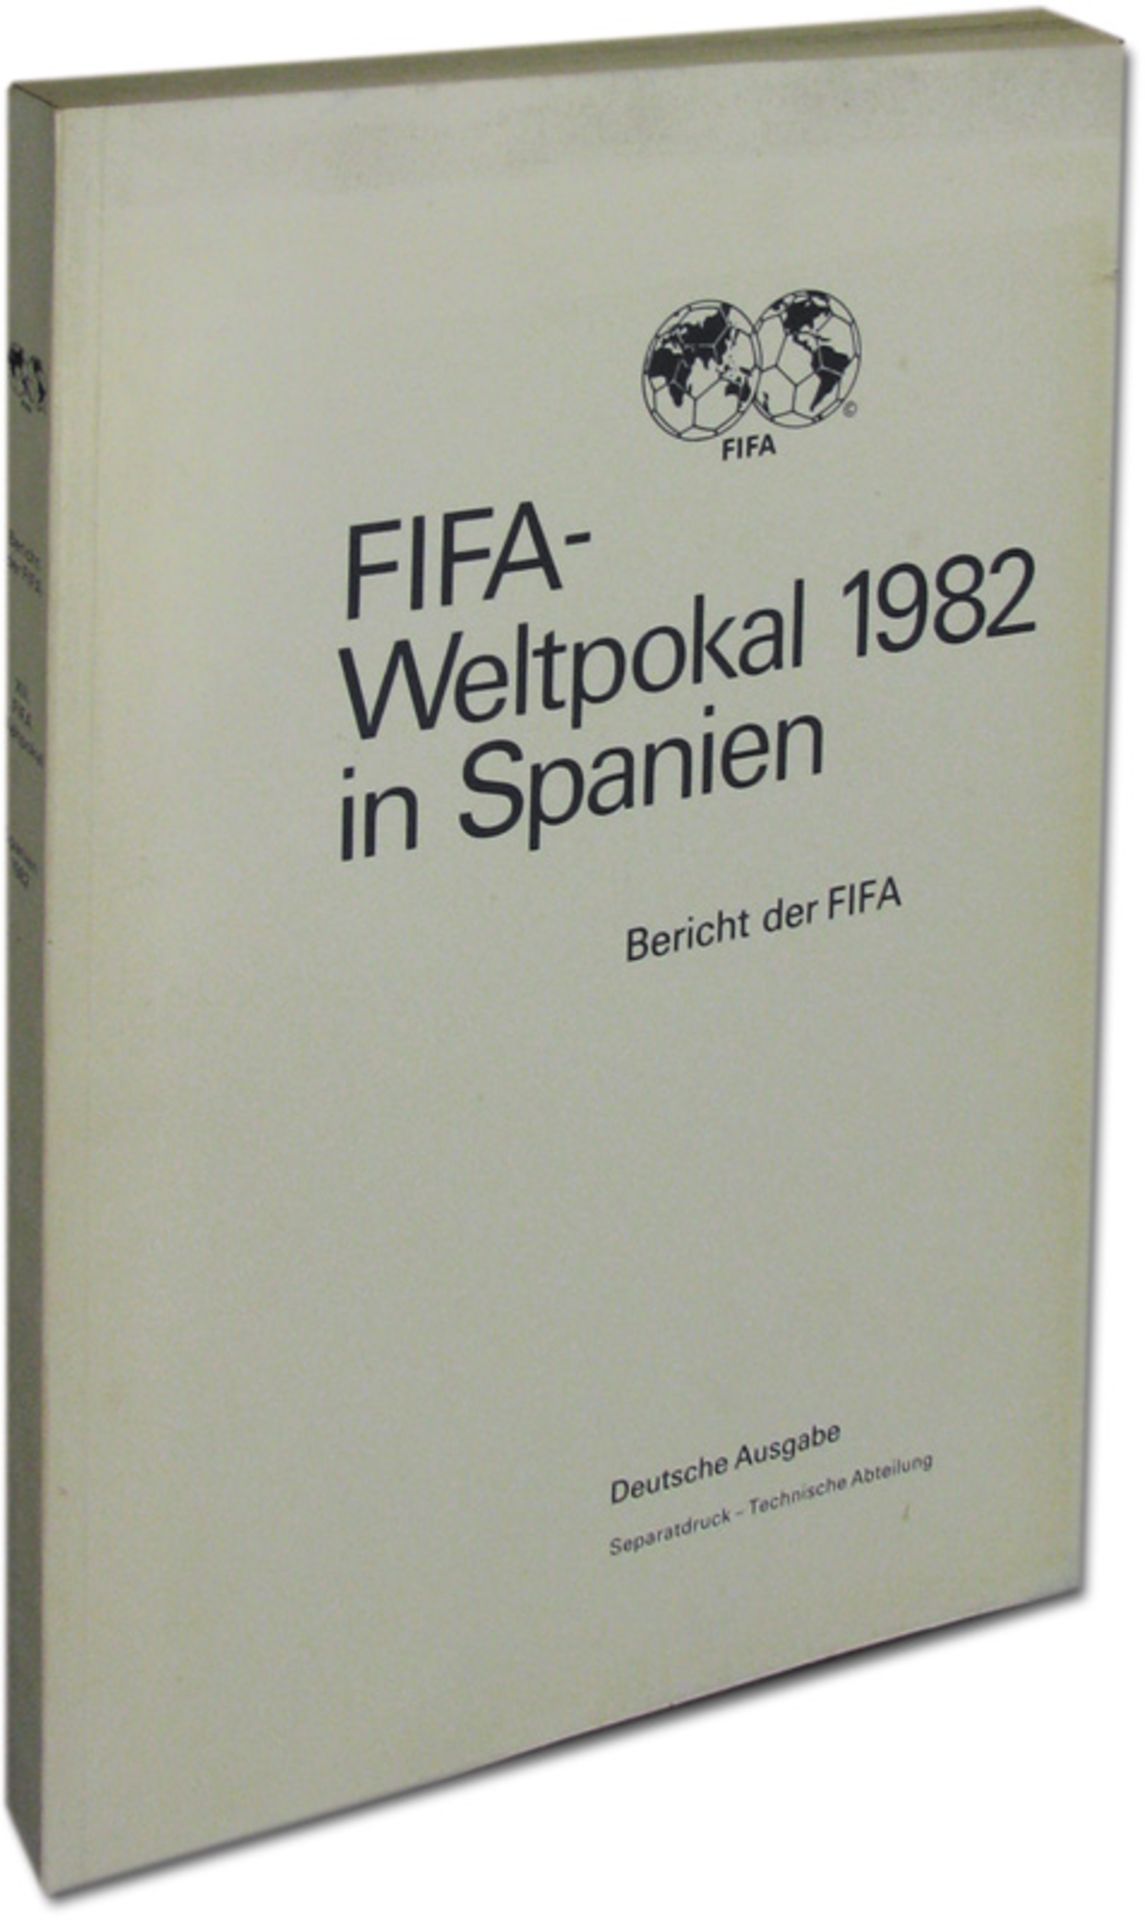 World Cup 1982. Official FIFA-Report - German edition. Size 22x30cm, 248 pages, approx. 150 m/c phot